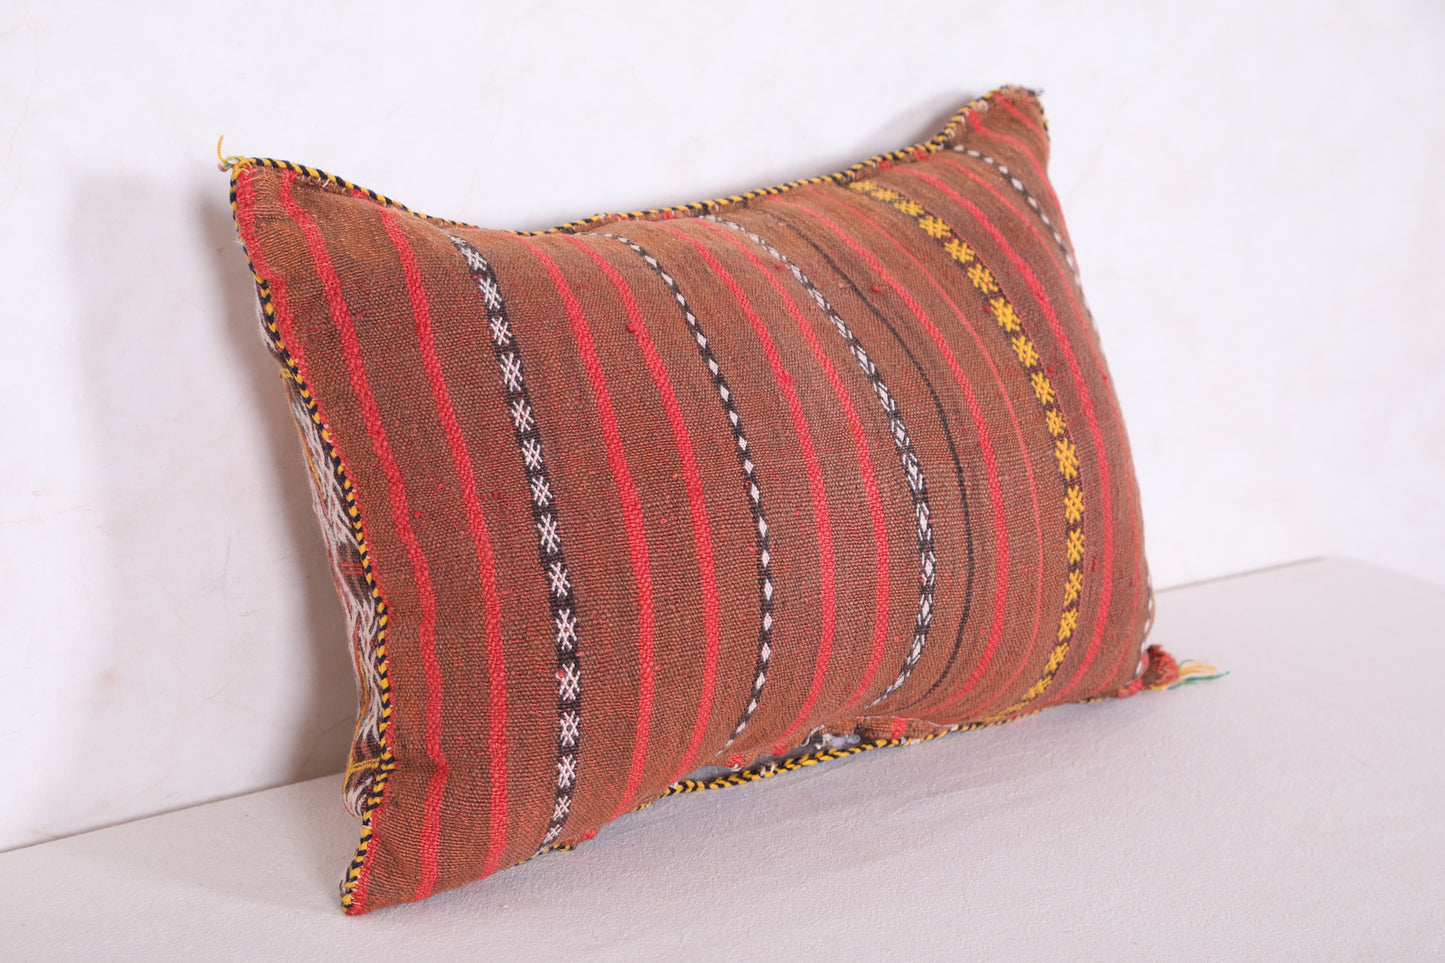 Moroccan Berber Pillow 14.1 INCHES X 20 INCHES